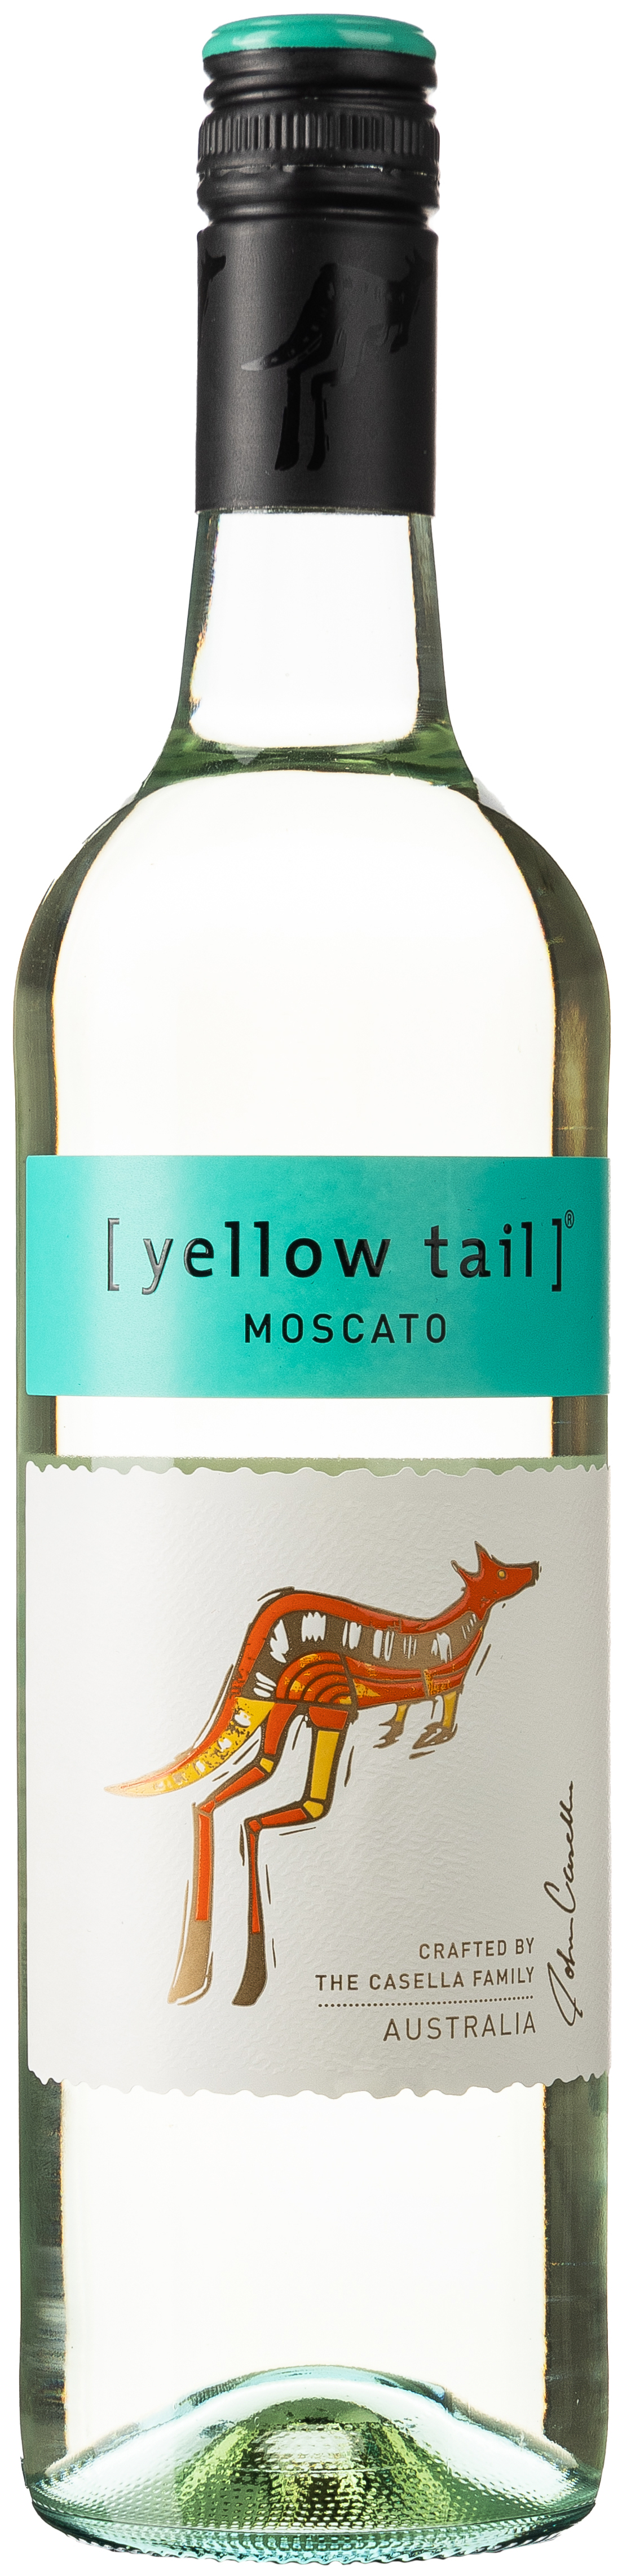 Yellow Tail Moscato 7,5% vol. 0,75L 